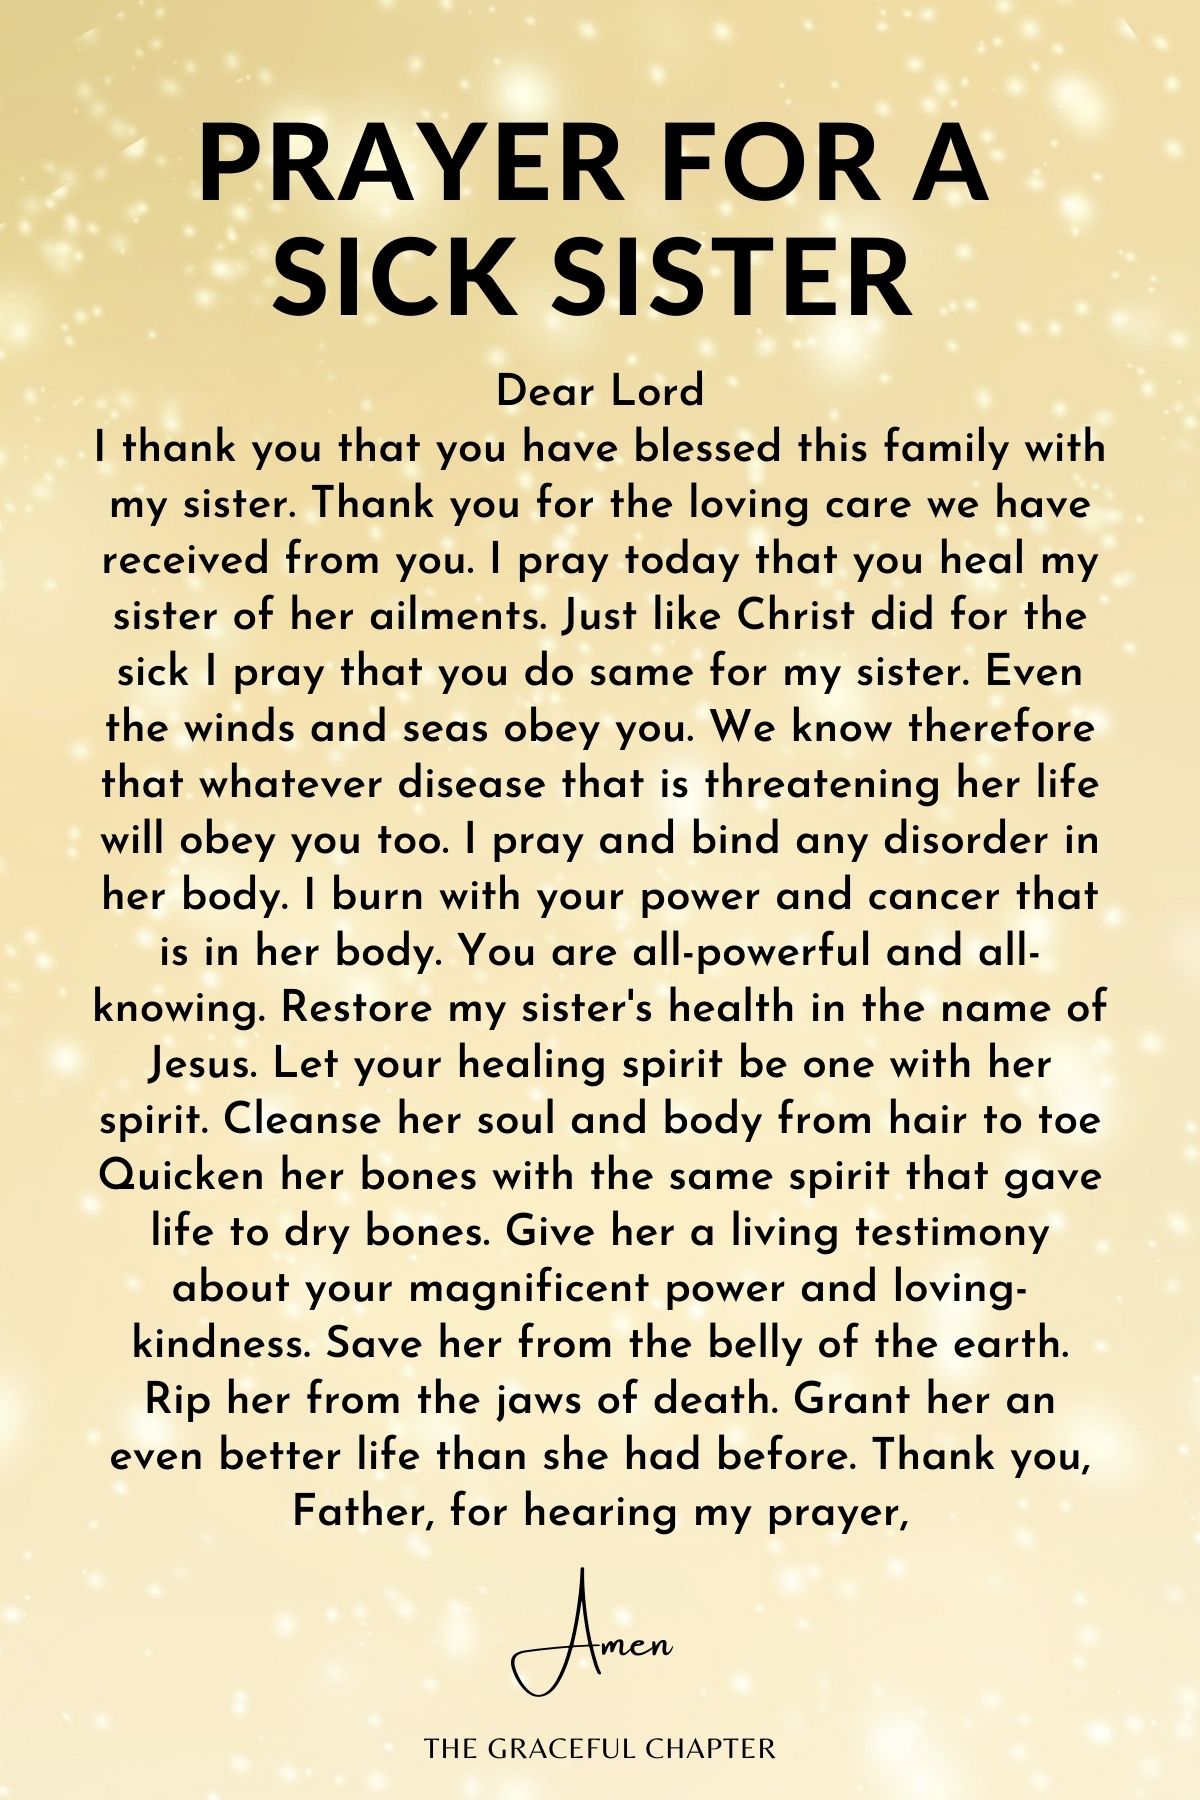 Prayer for a sick sister